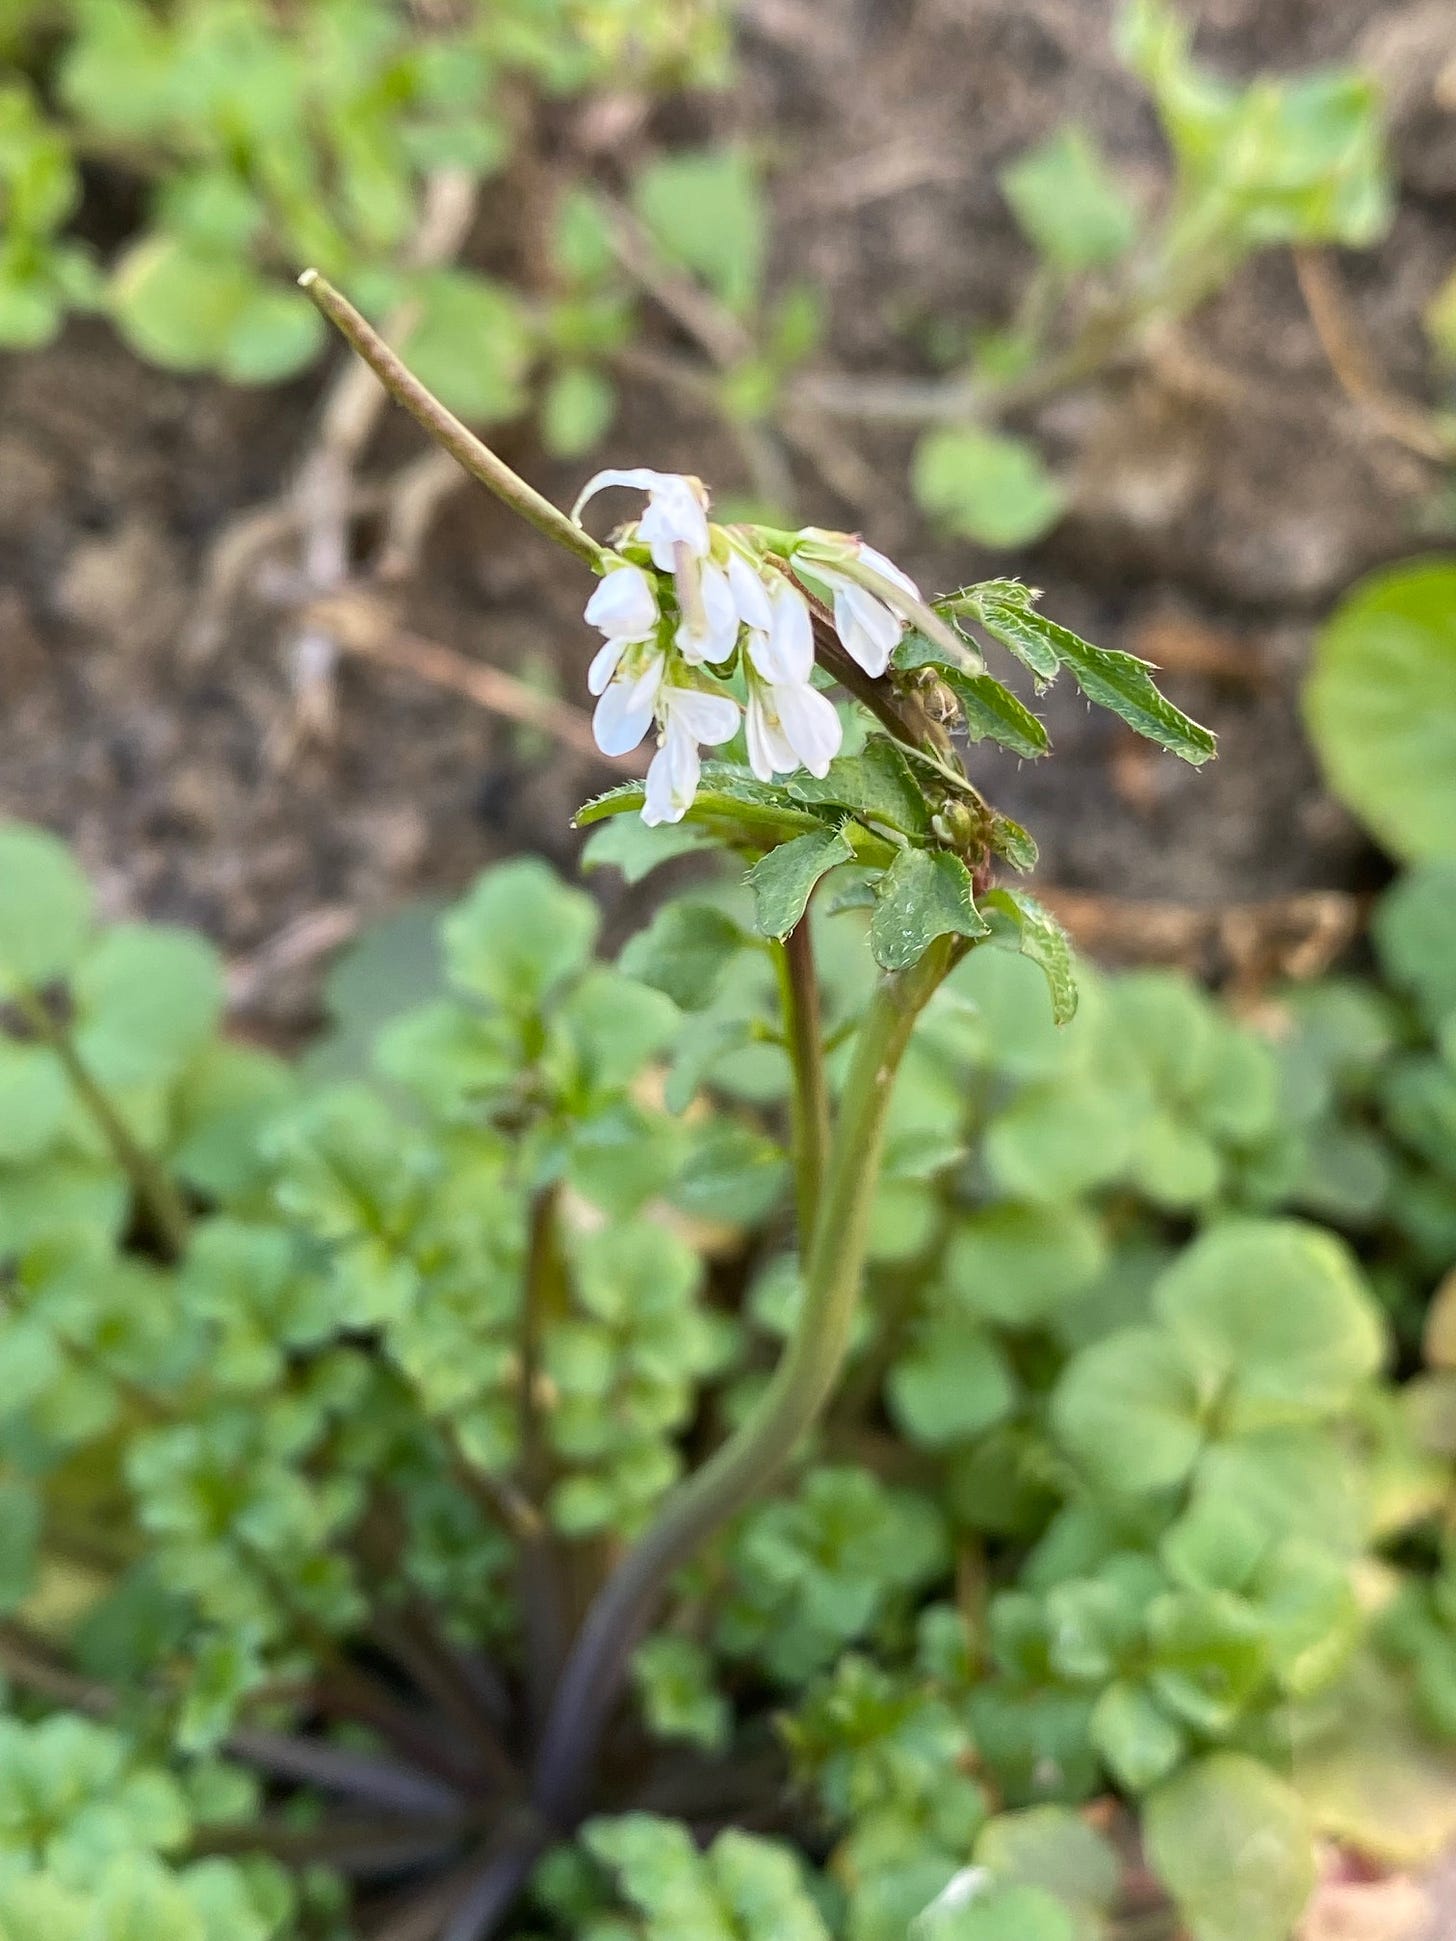 Cardamine hirsuta  Flowering stem shows a single new pod with the visible outline of single row of seeds.